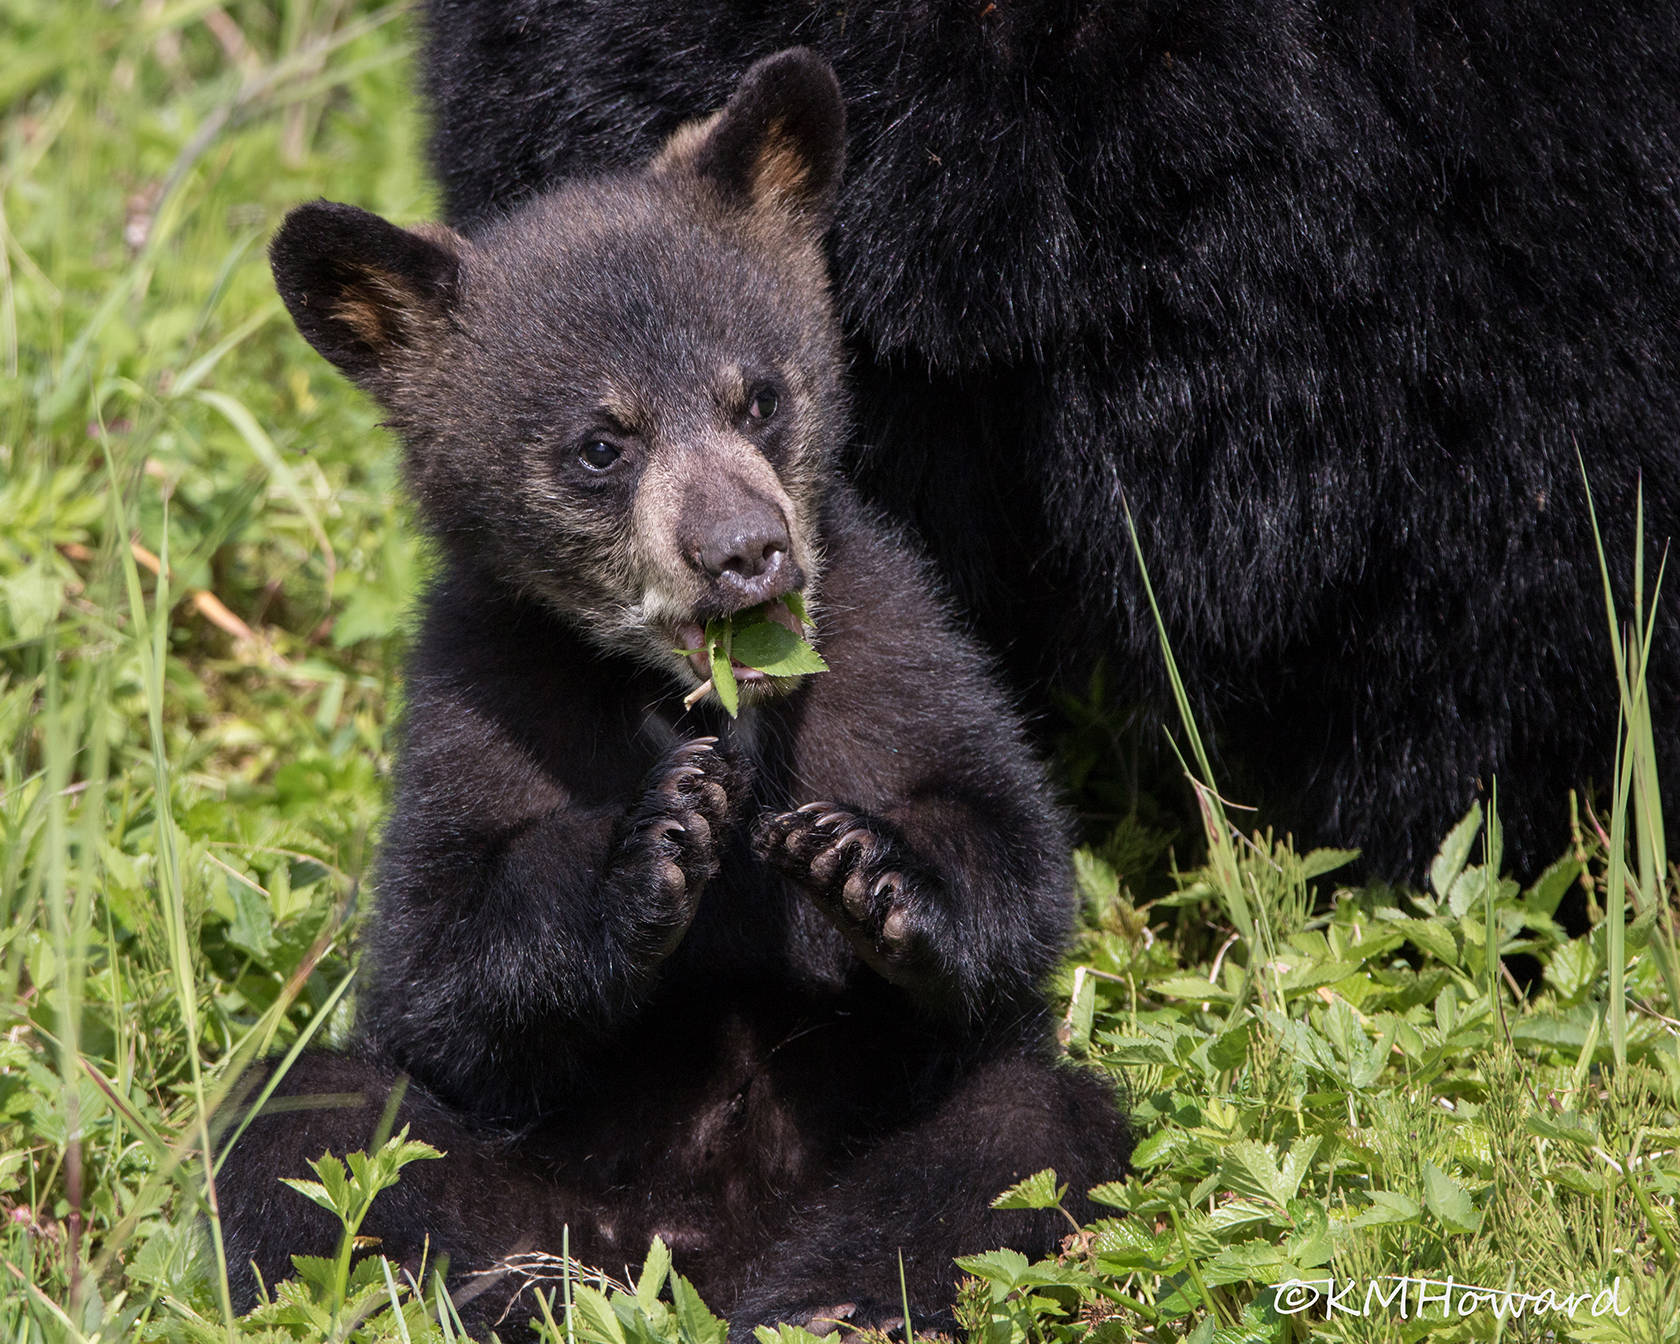 Bear cub in the meadow at the Mendenhall Glacier on June 8. (Photo by Kerry Howard)